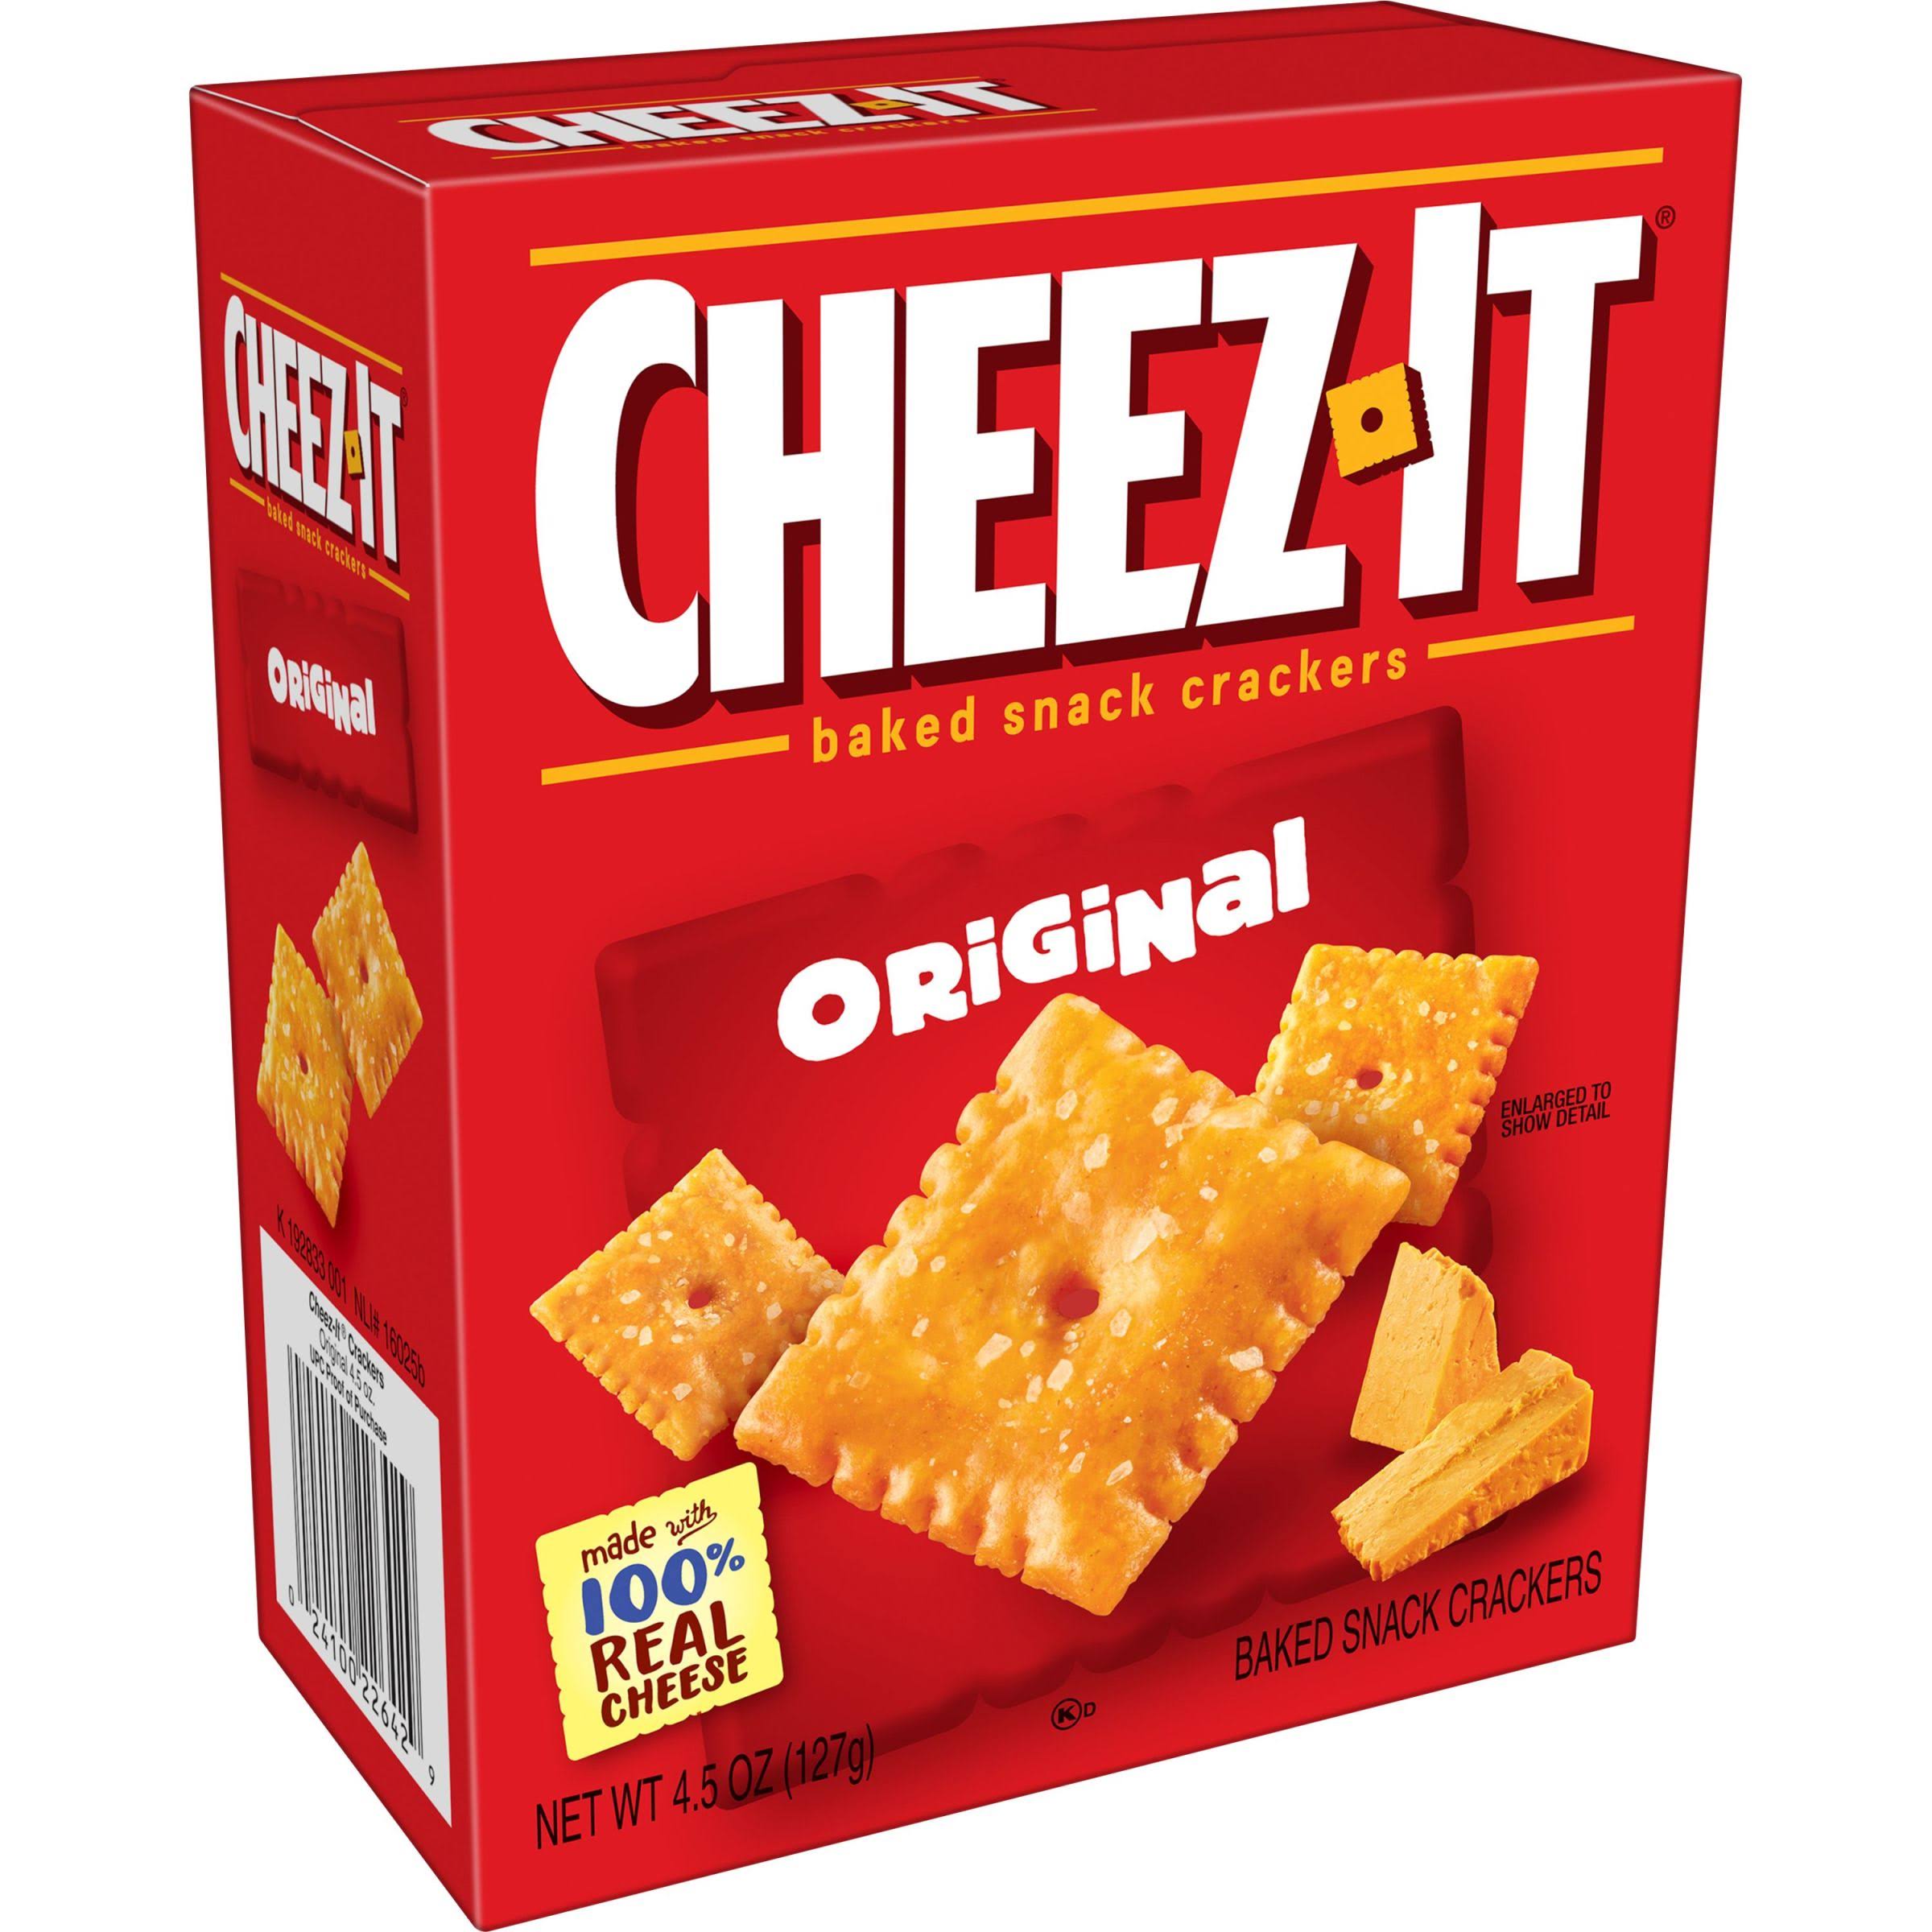 Cheez-it Baked Snack Crackers